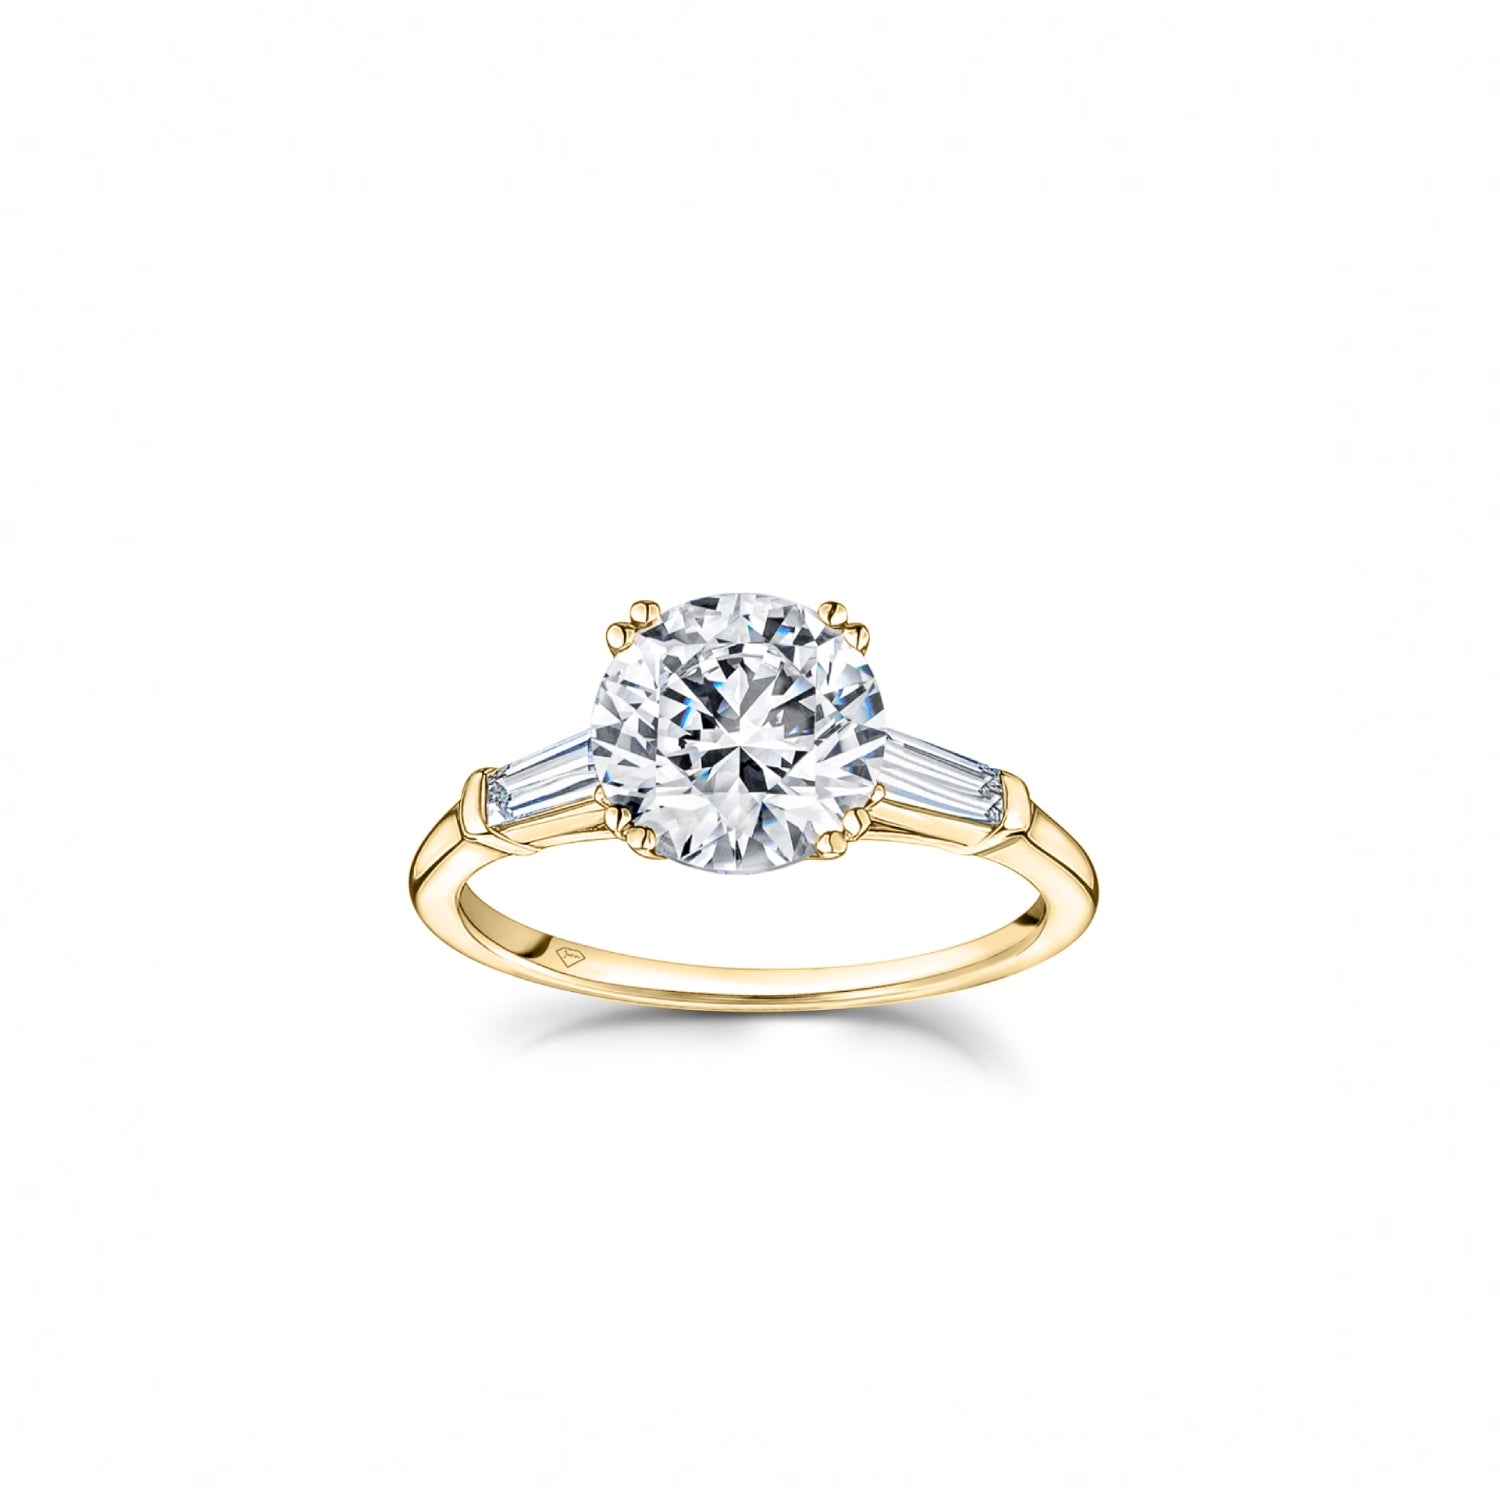 Round Brilliant and Baguette Cut Diamond Three-Stone Engagement Ring in Yellow Gold